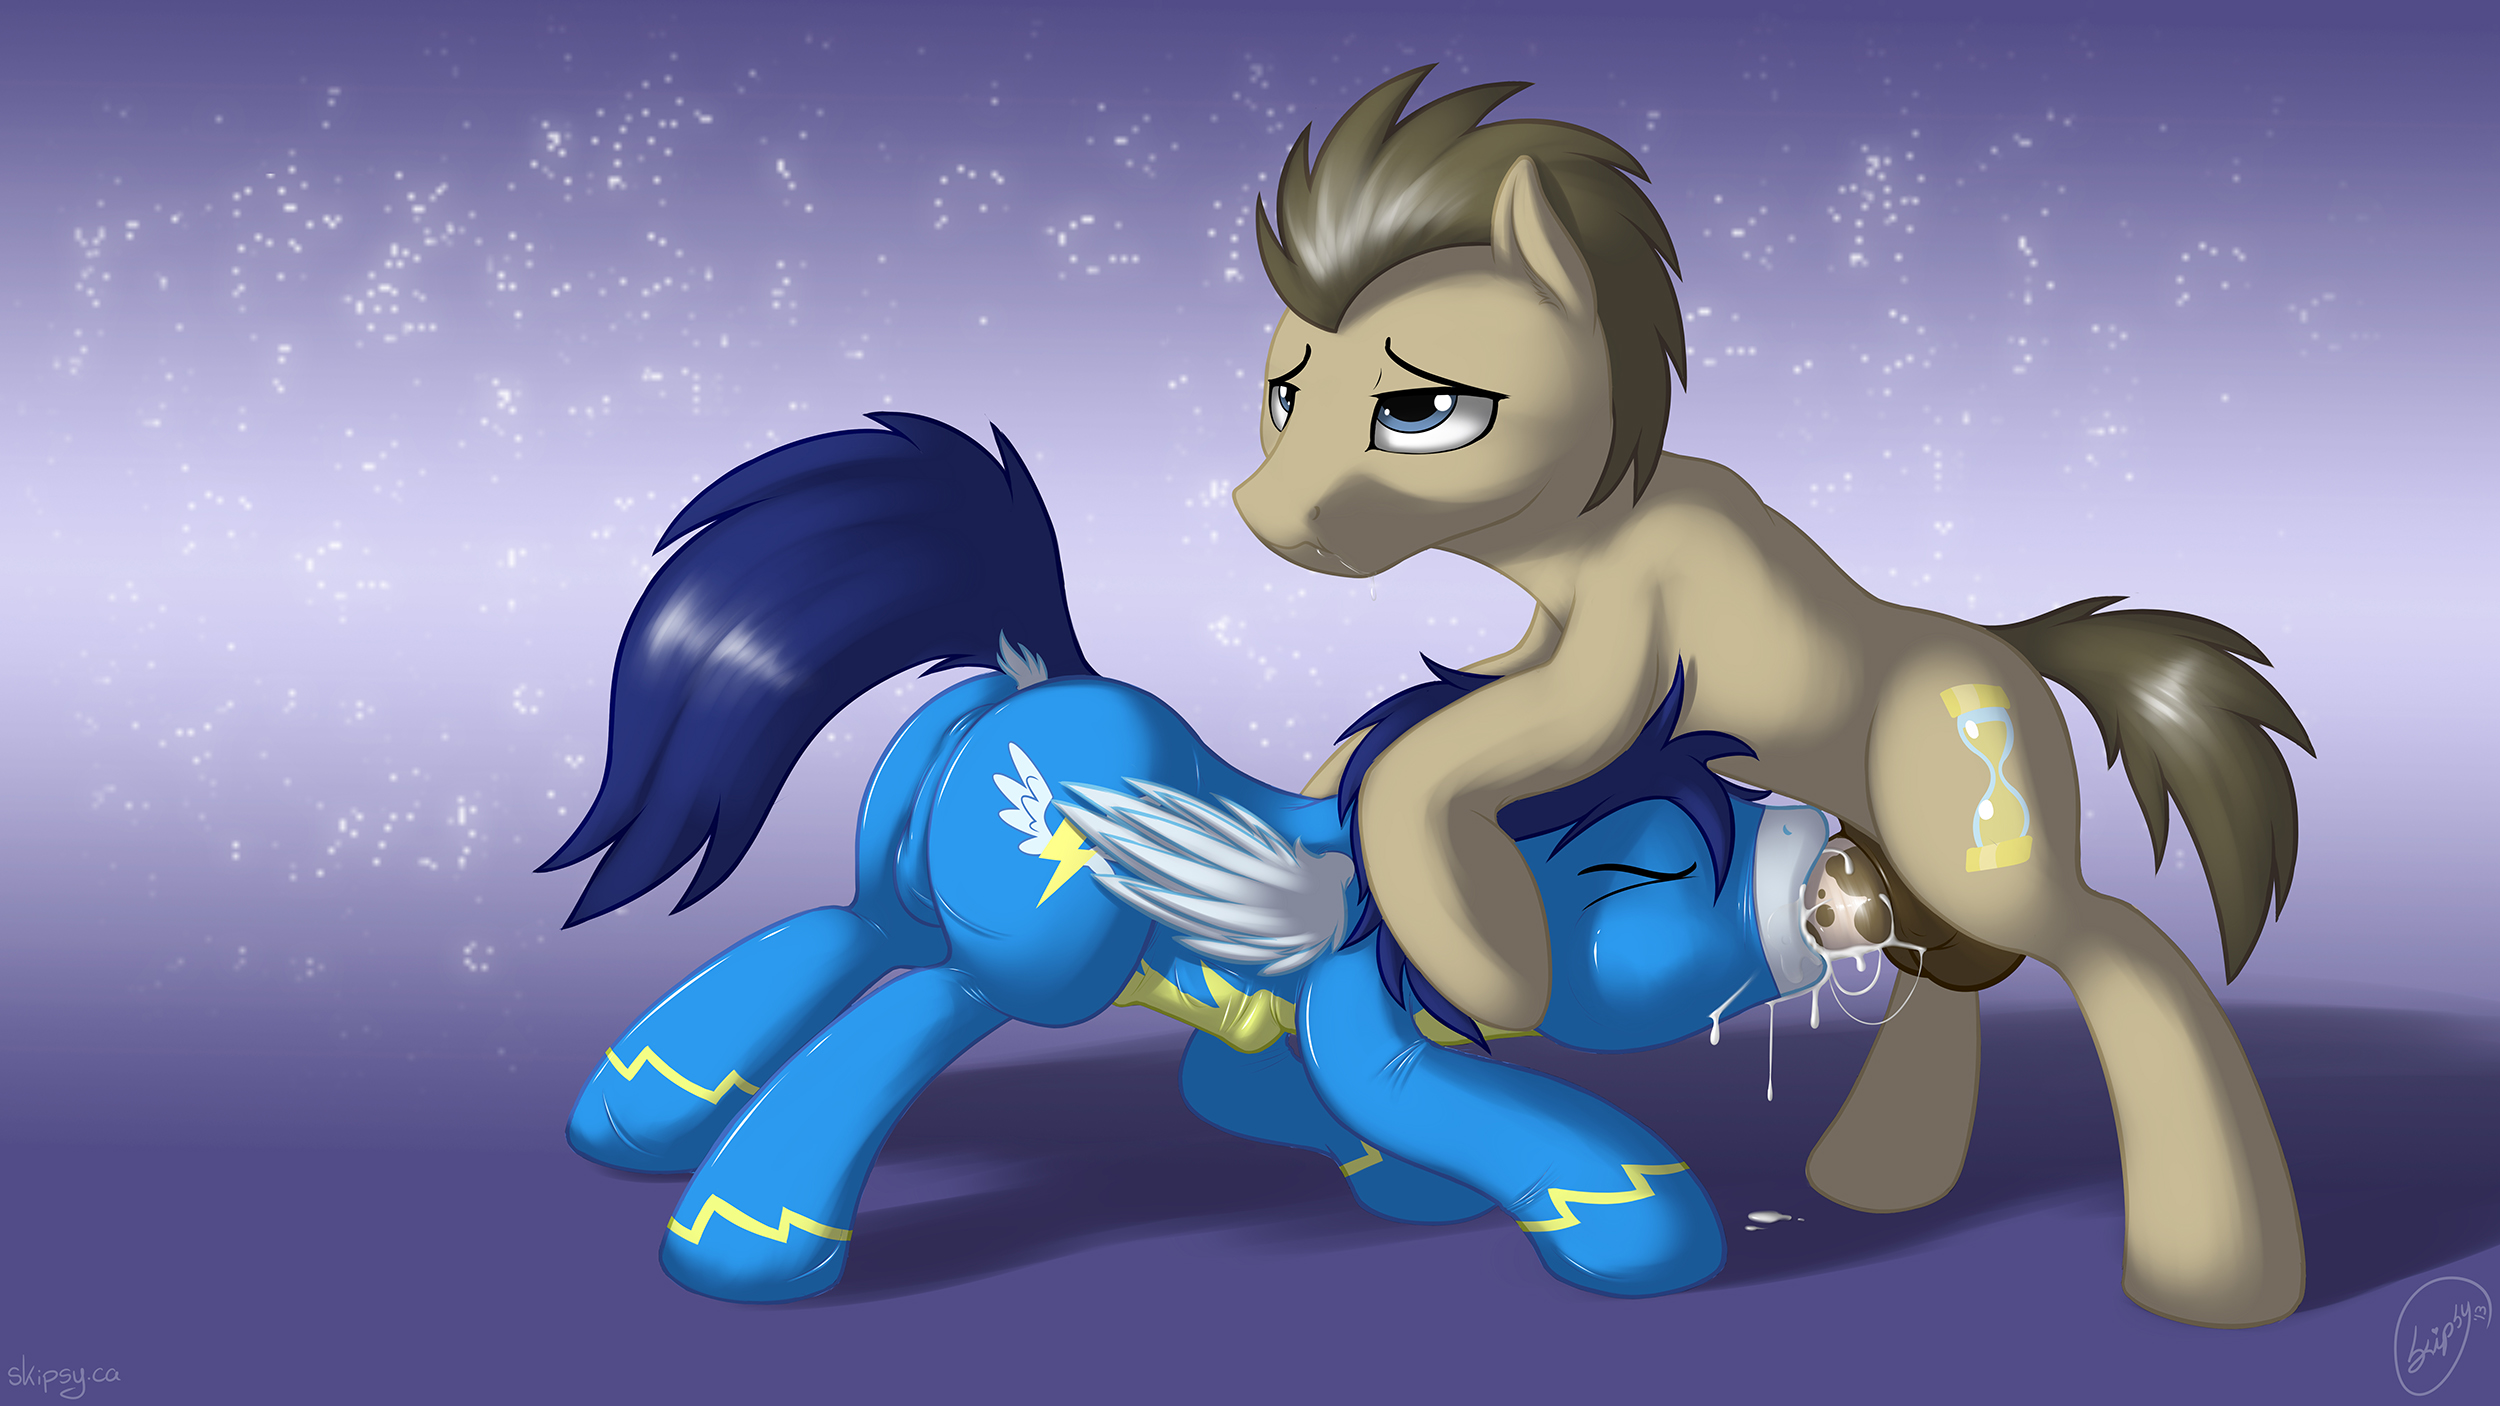 Mlp Doctor Whooves Porn - 292339 - e621